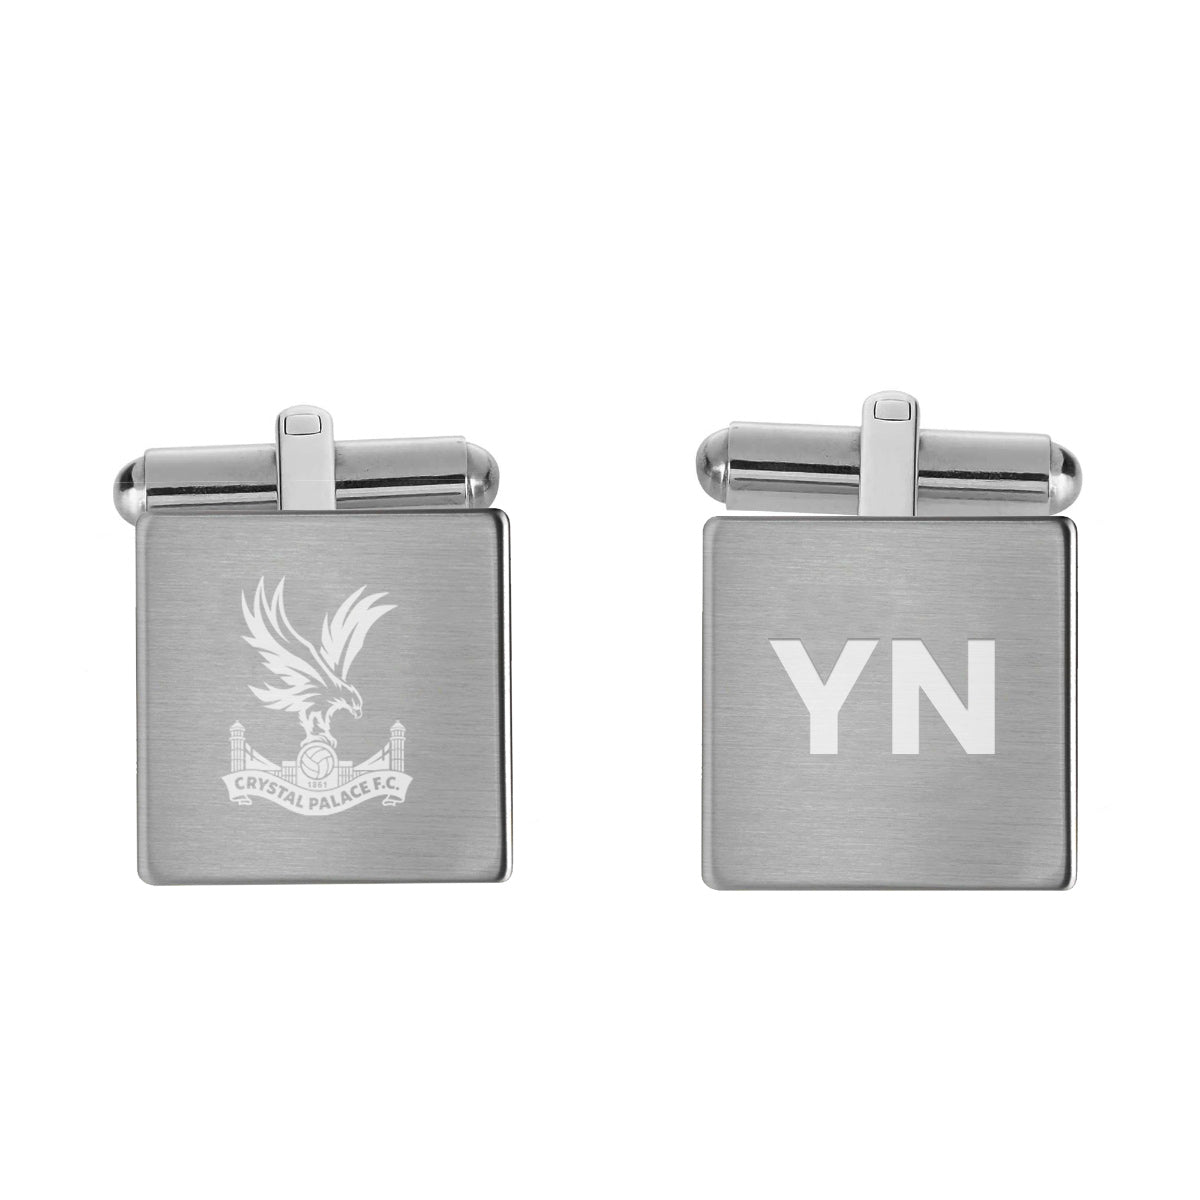 Personalised Crystal Palace FC Crest Cufflinks